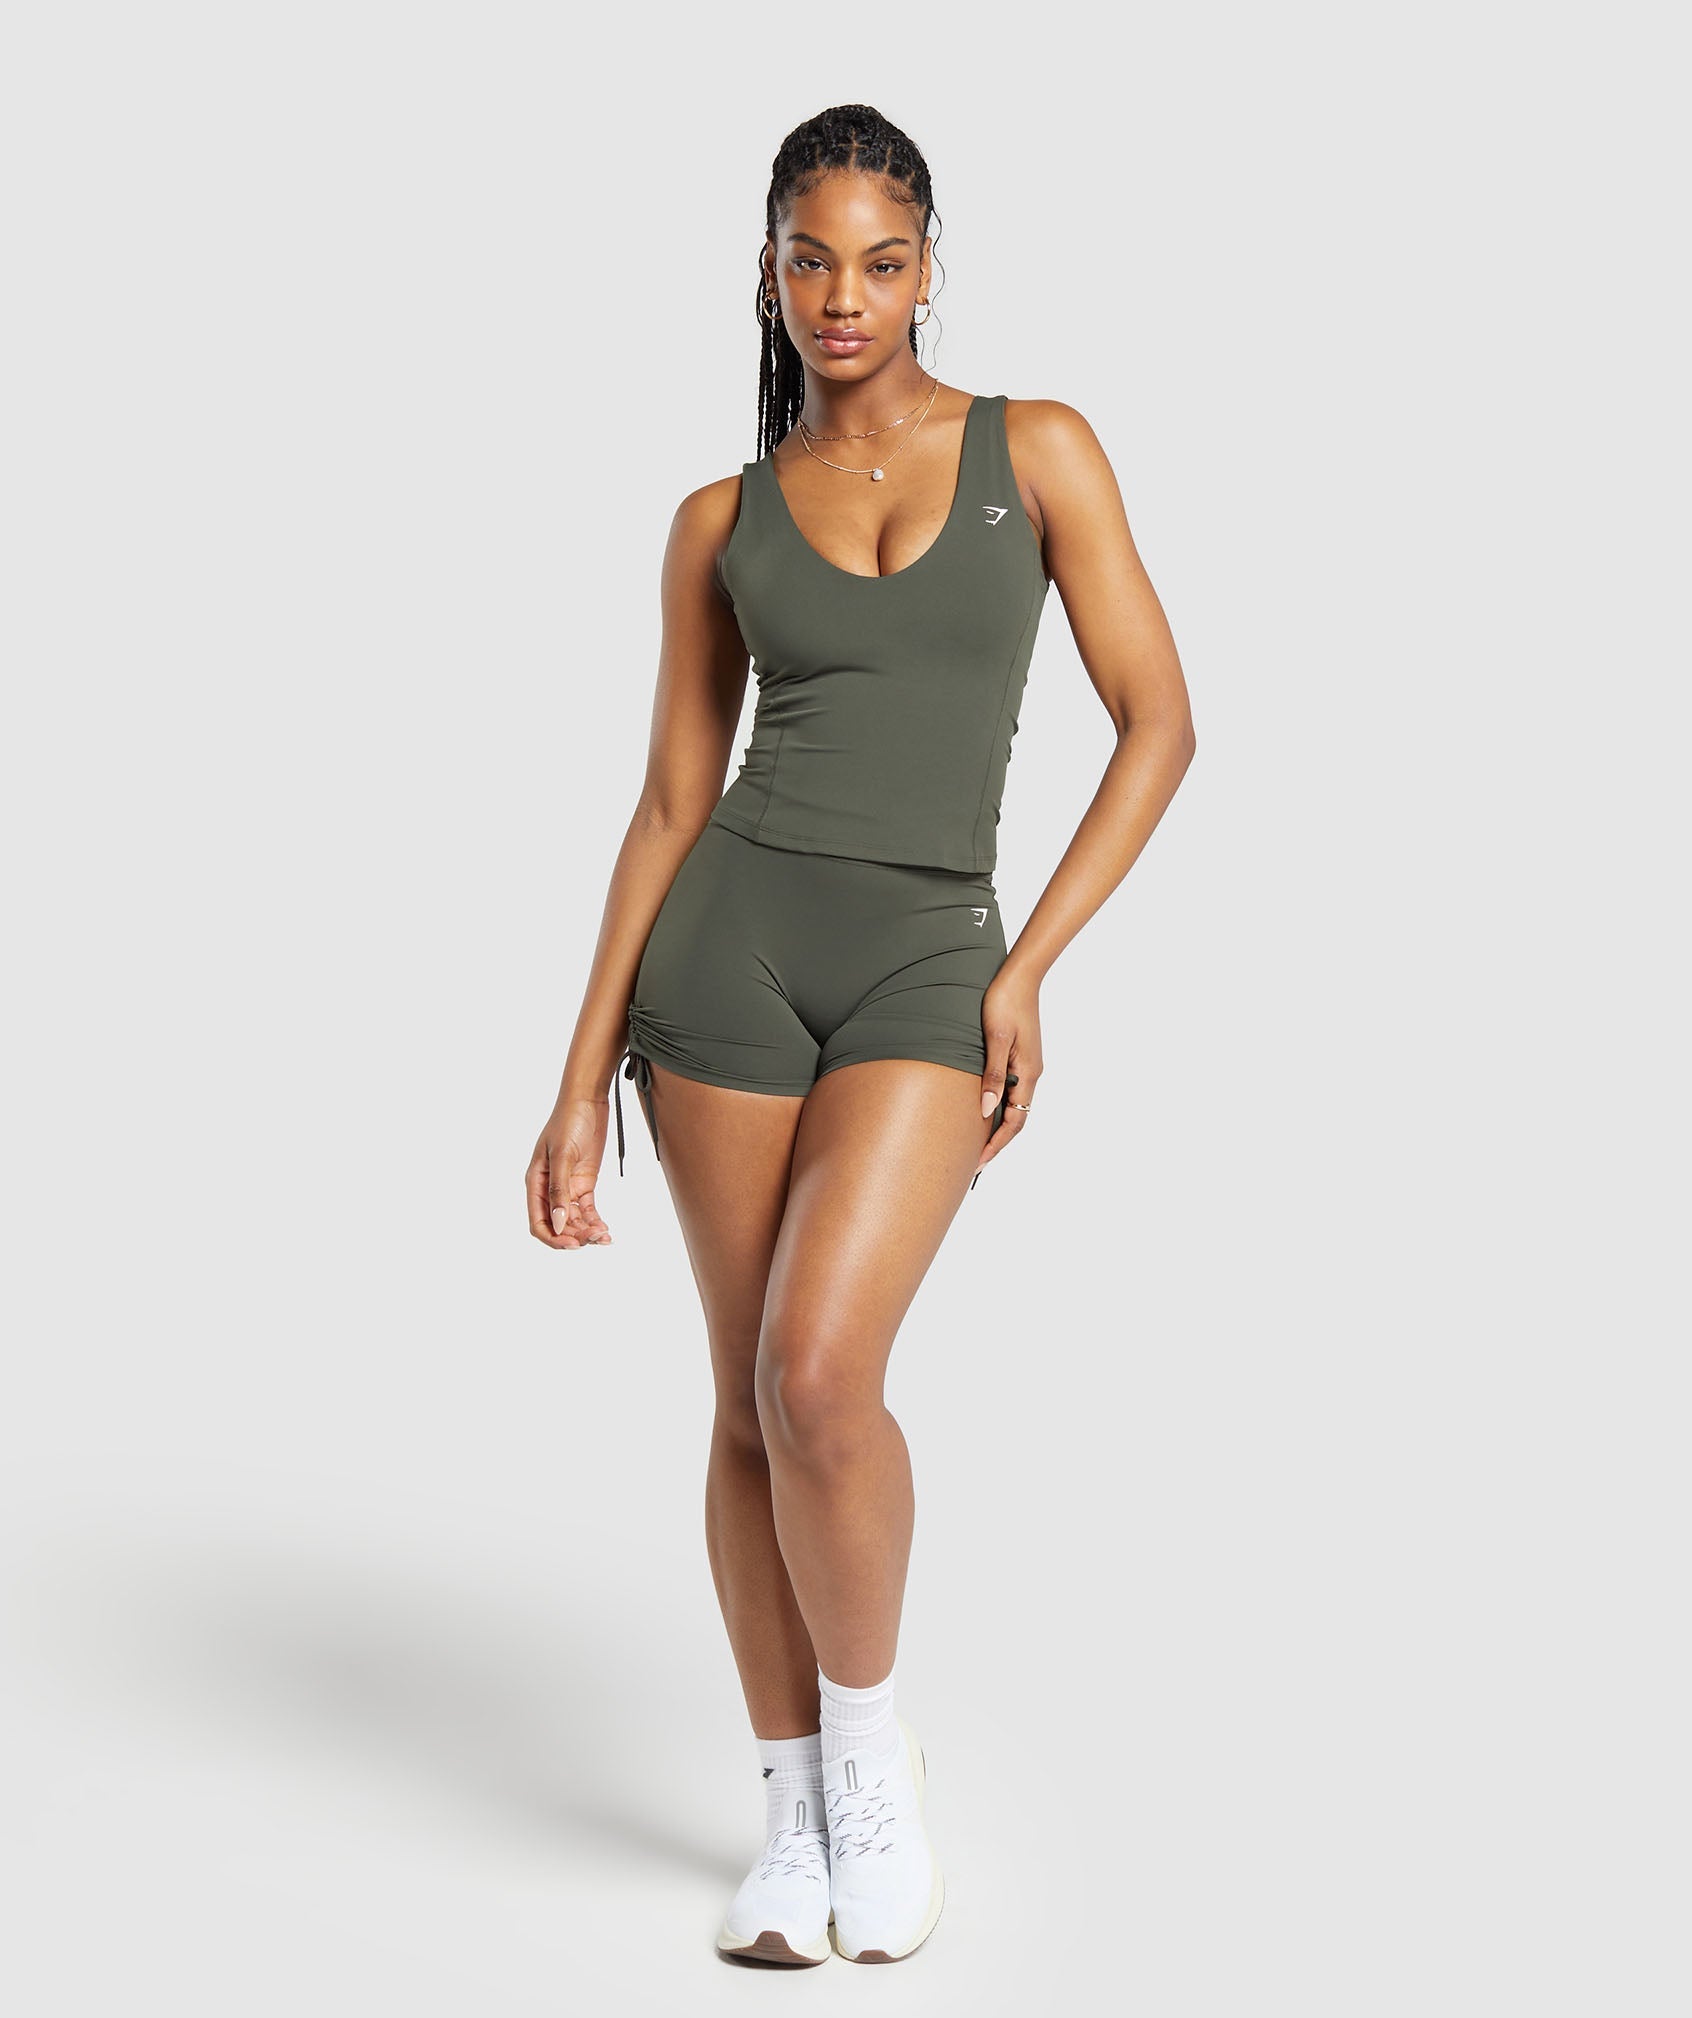 Ruche Tank in Strength Green - view 4